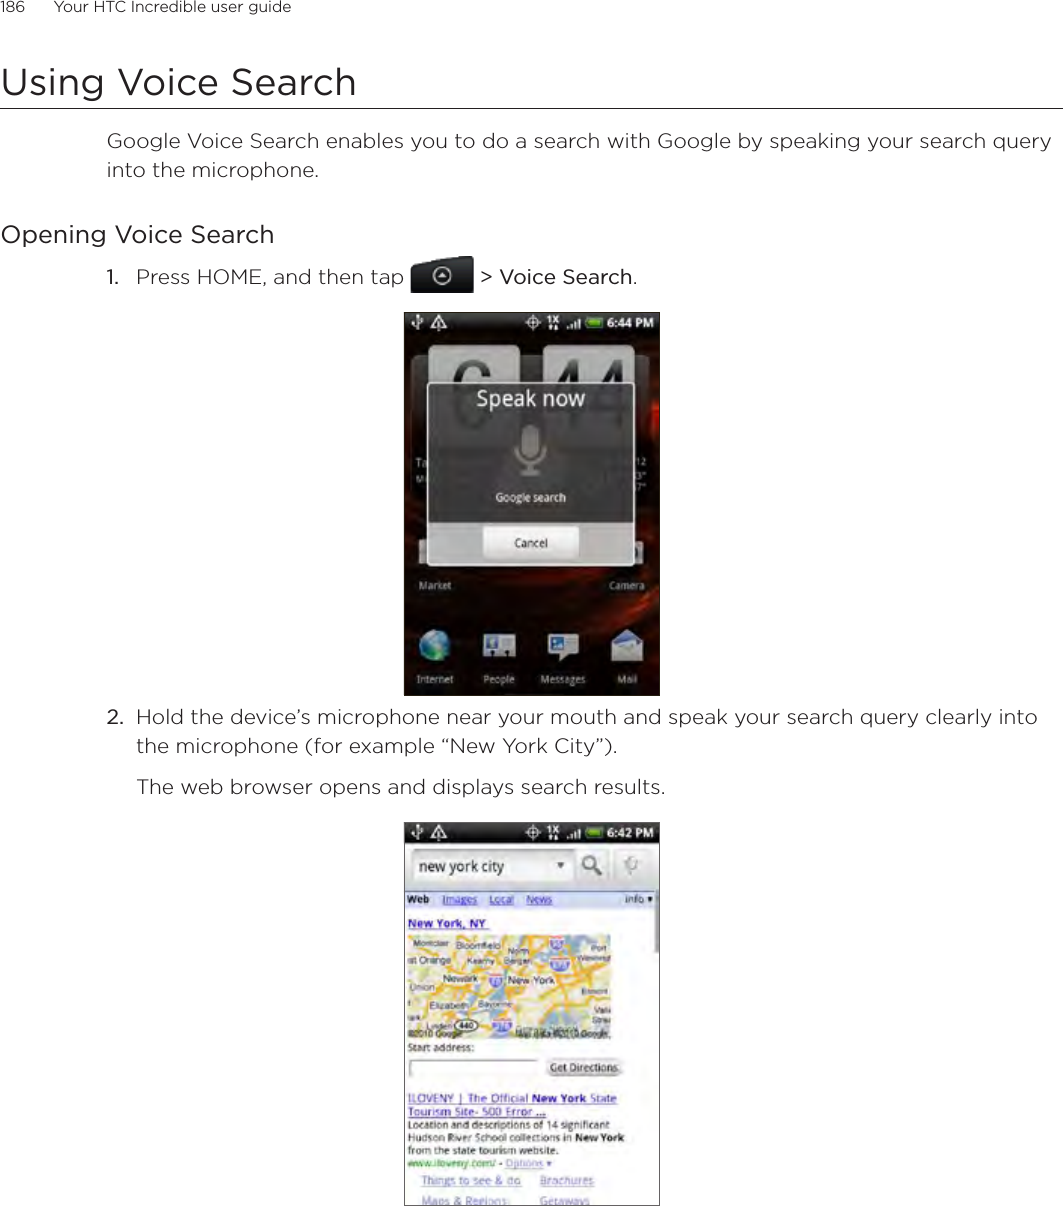 186      Your HTC Incredible user guide  Using Voice SearchGoogle Voice Search enables you to do a search with Google by speaking your search query into the microphone. Opening Voice SearchPress HOME, and then tap   &gt; Voice Search. Hold the device’s microphone near your mouth and speak your search query clearly into the microphone (for example “New York City”).The web browser opens and displays search results.1.2.